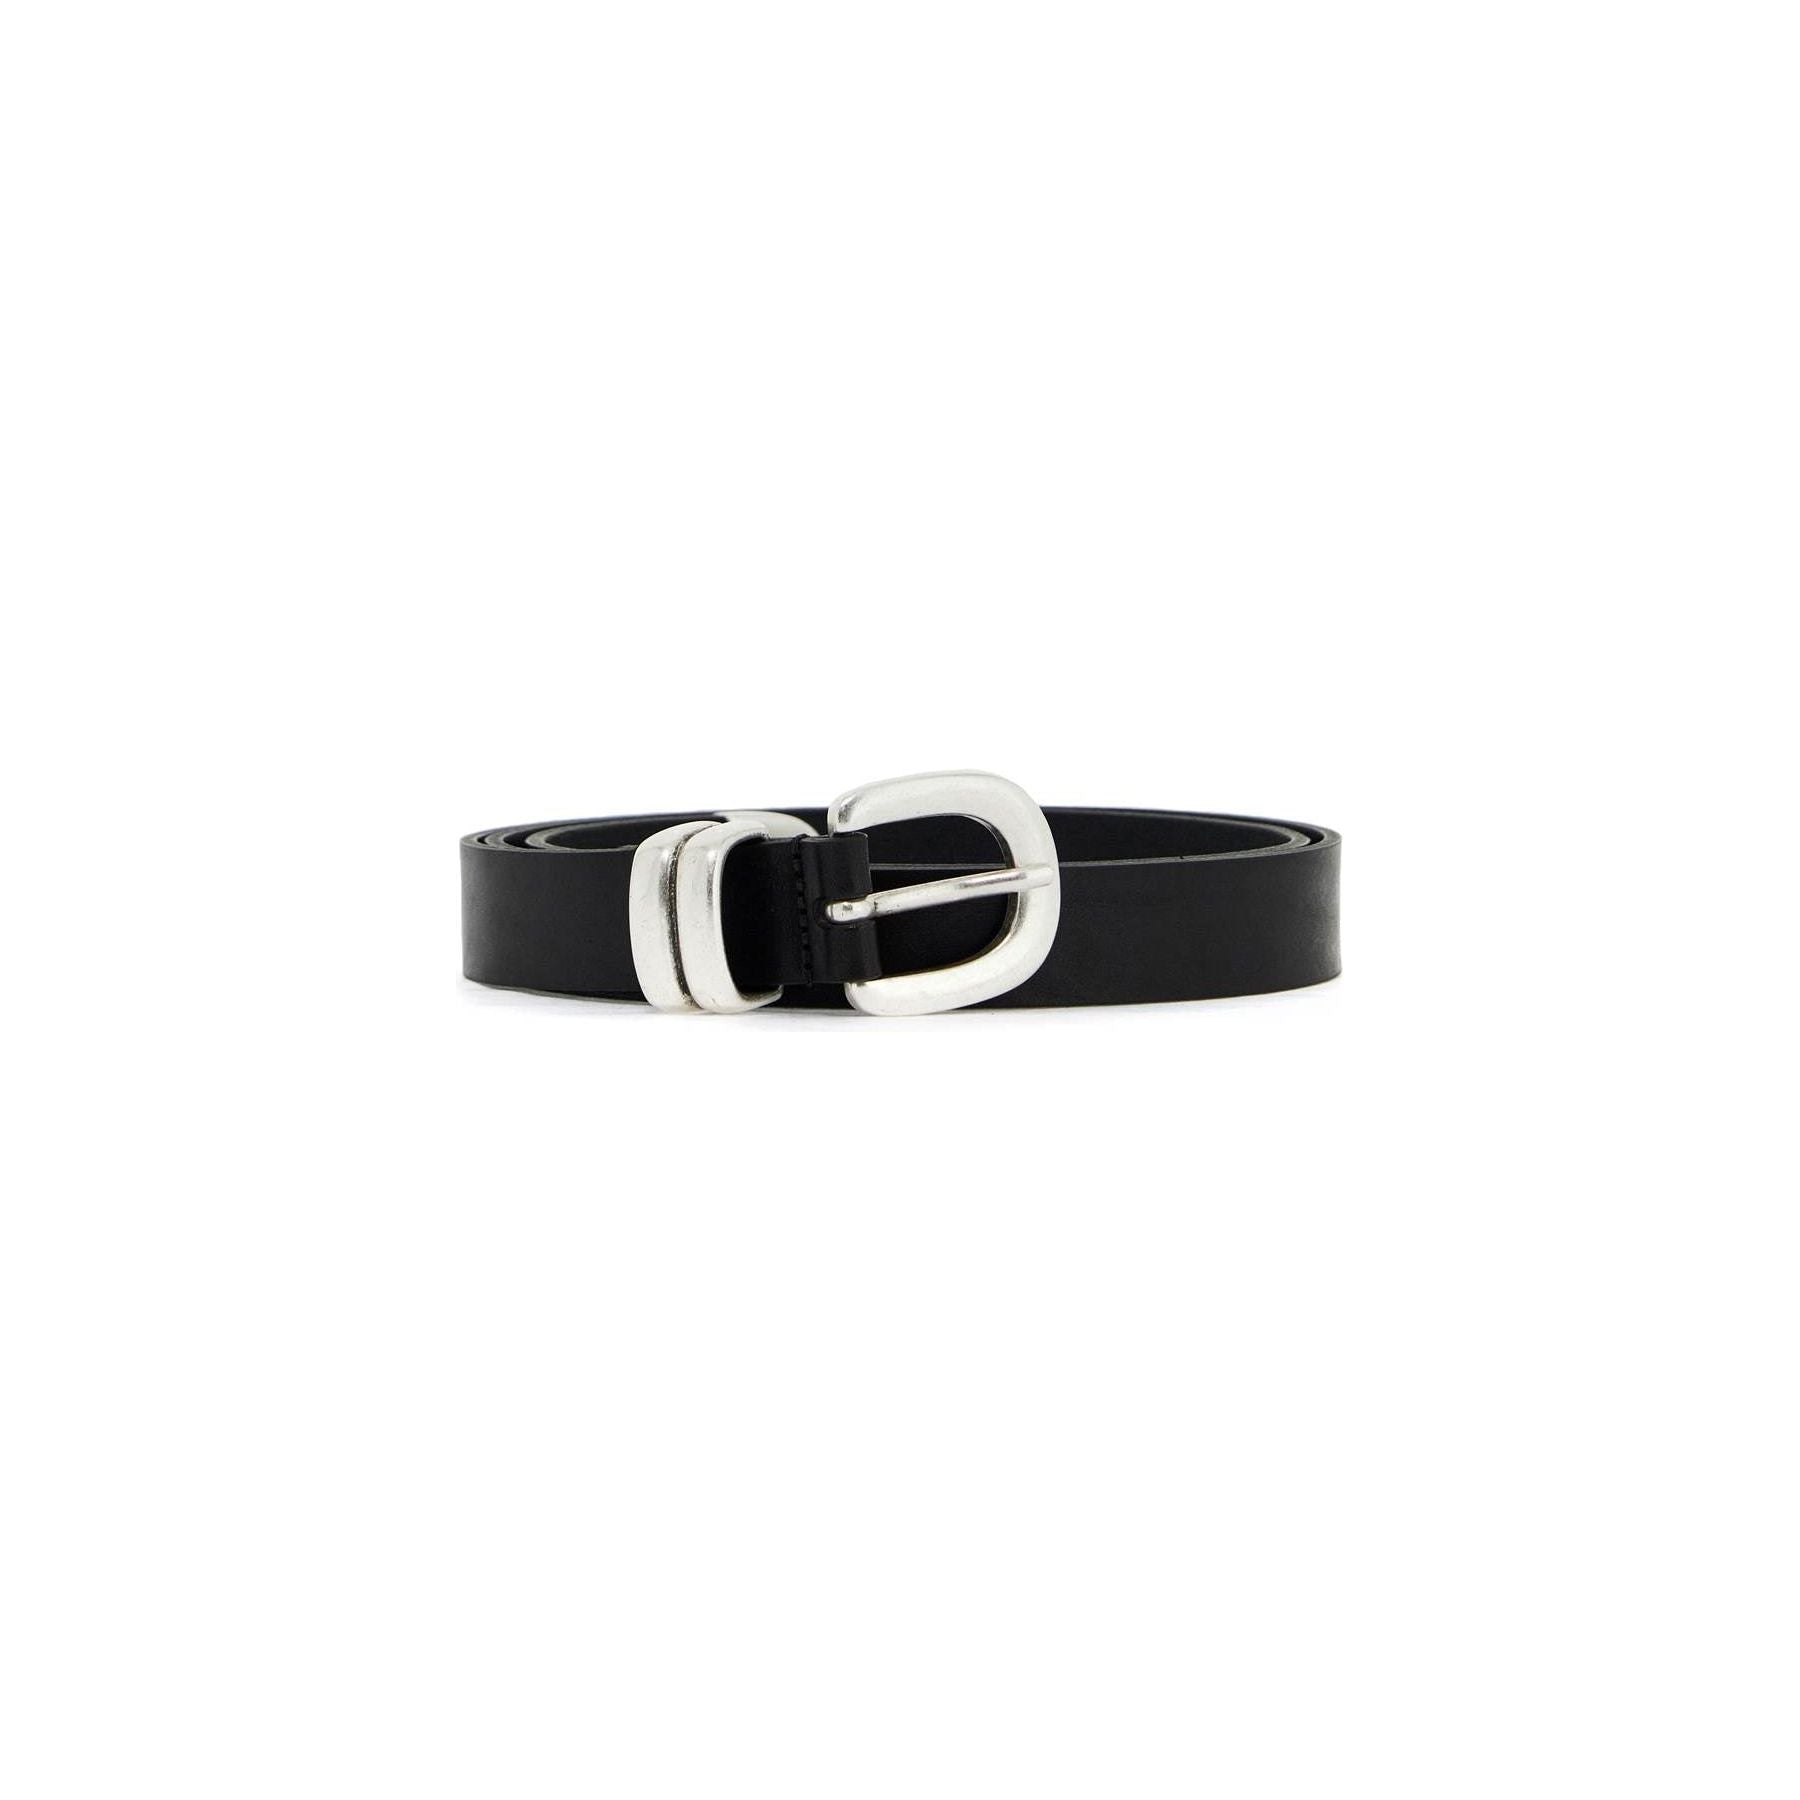 Zoilo Leather Belt